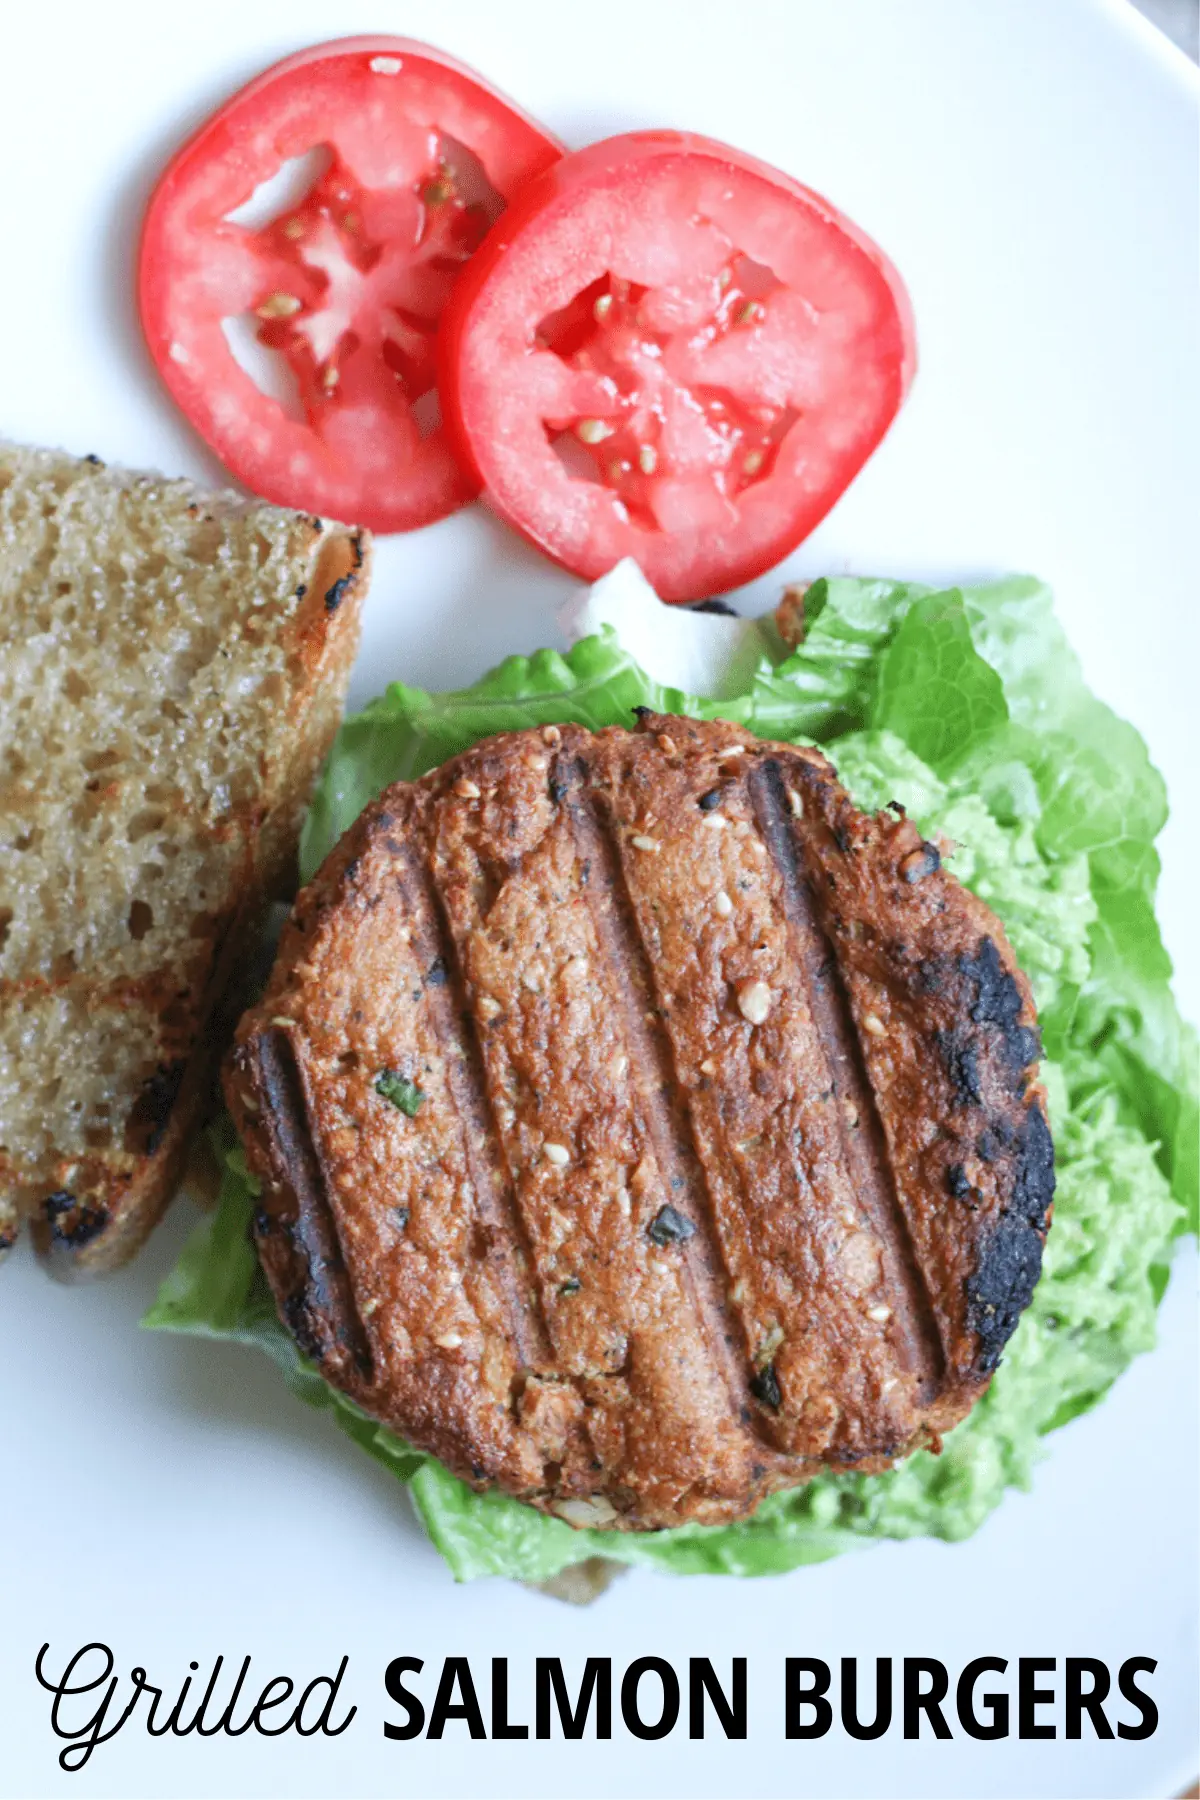 salmon burger on bread with lettuce and avocado, with tomatoes on the side